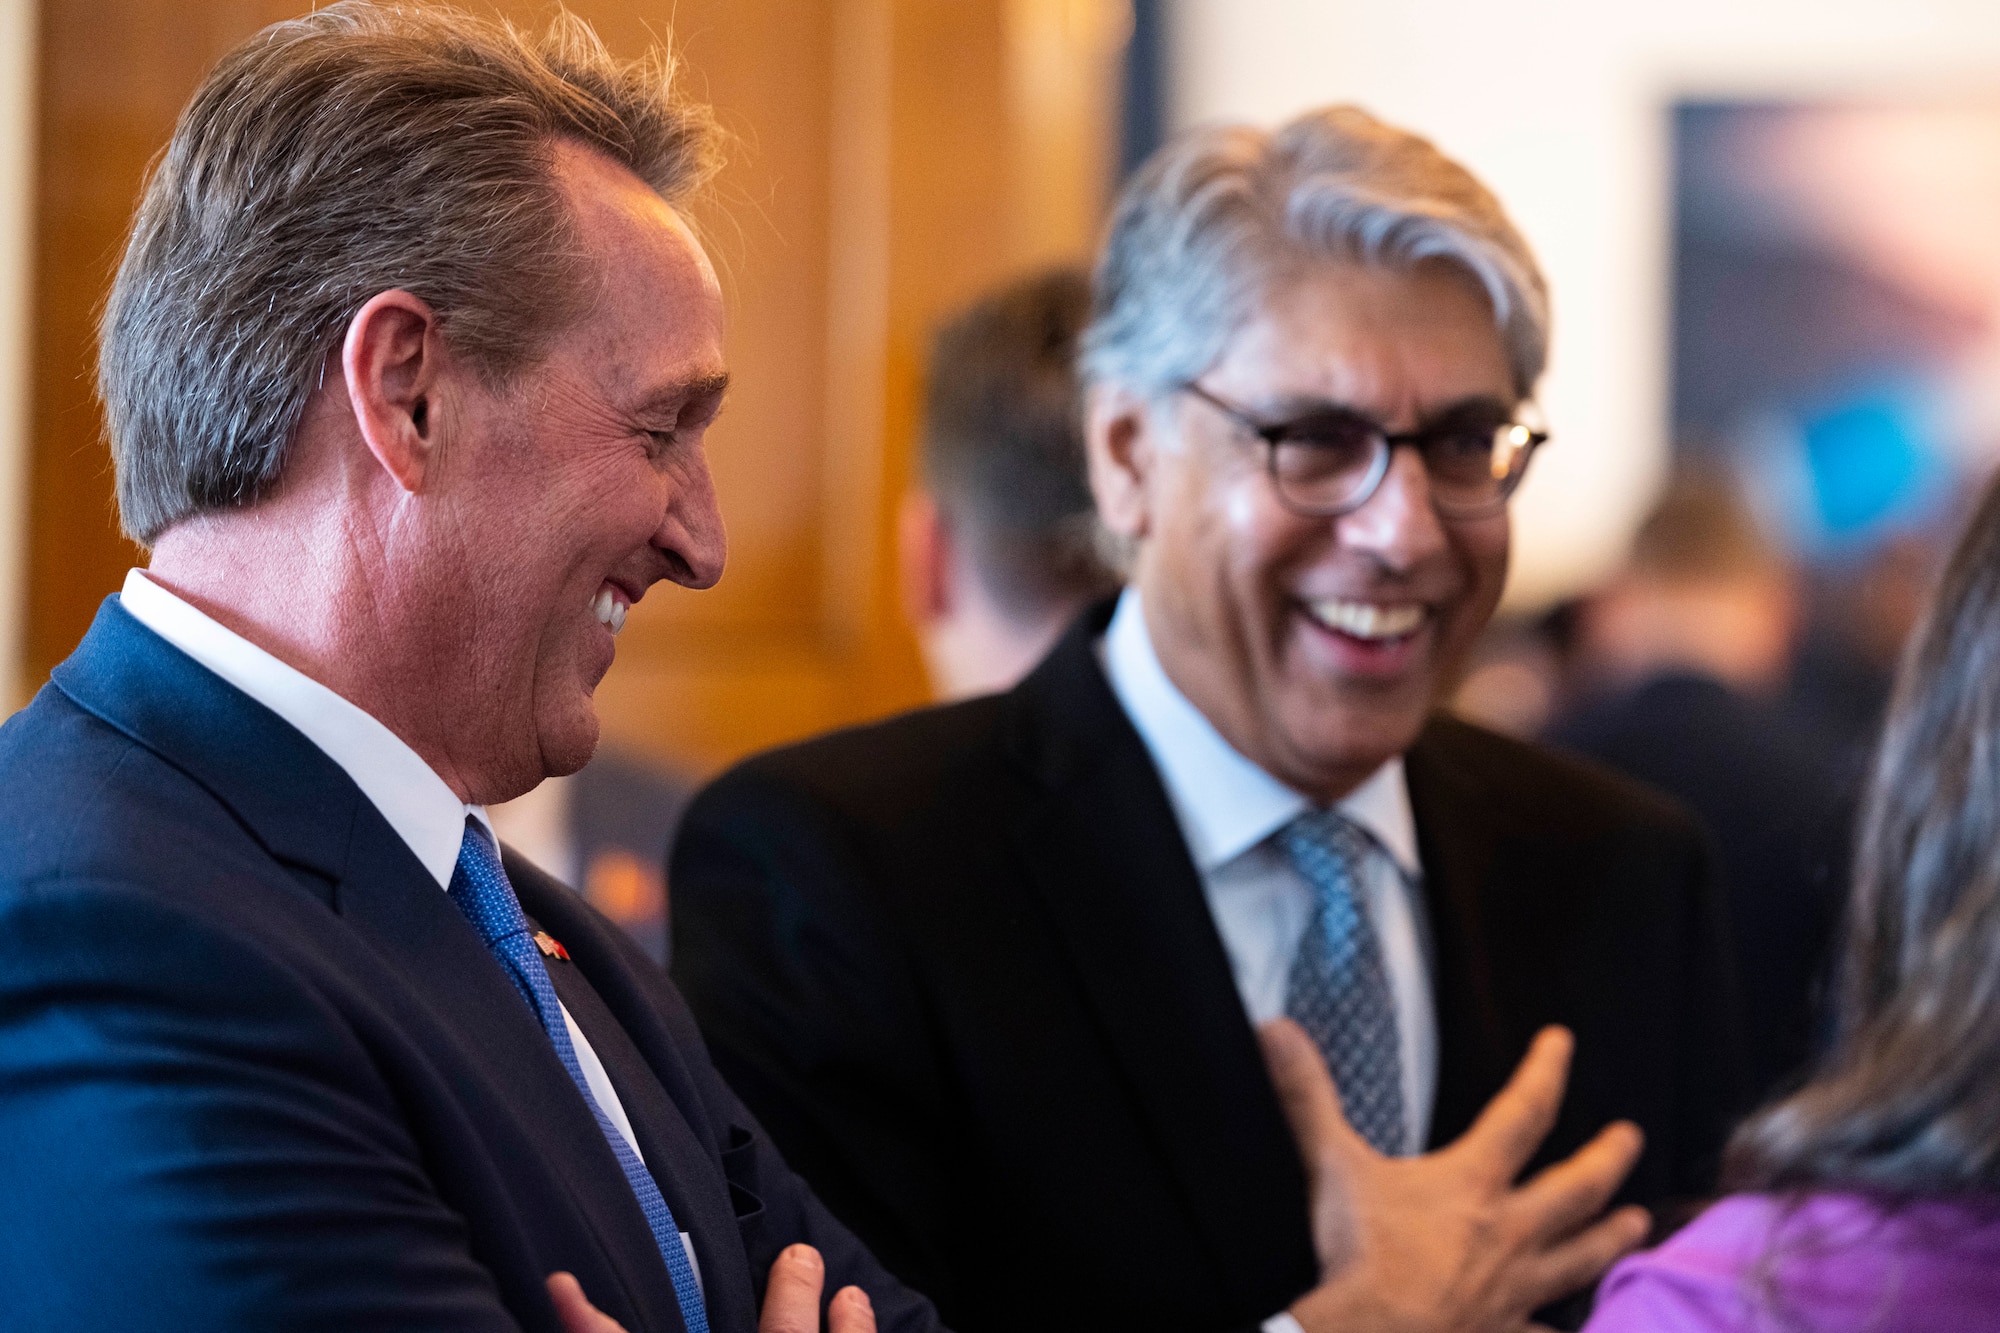 In celebration of the 70th anniversary of Turkey’s accession to NATO, Ambassador Flake and Mrs. Flake hosted a luncheon to honor Turkey’s long and enduring partnership in the alliance and foster interpersonal connections between senior NATO leaders.